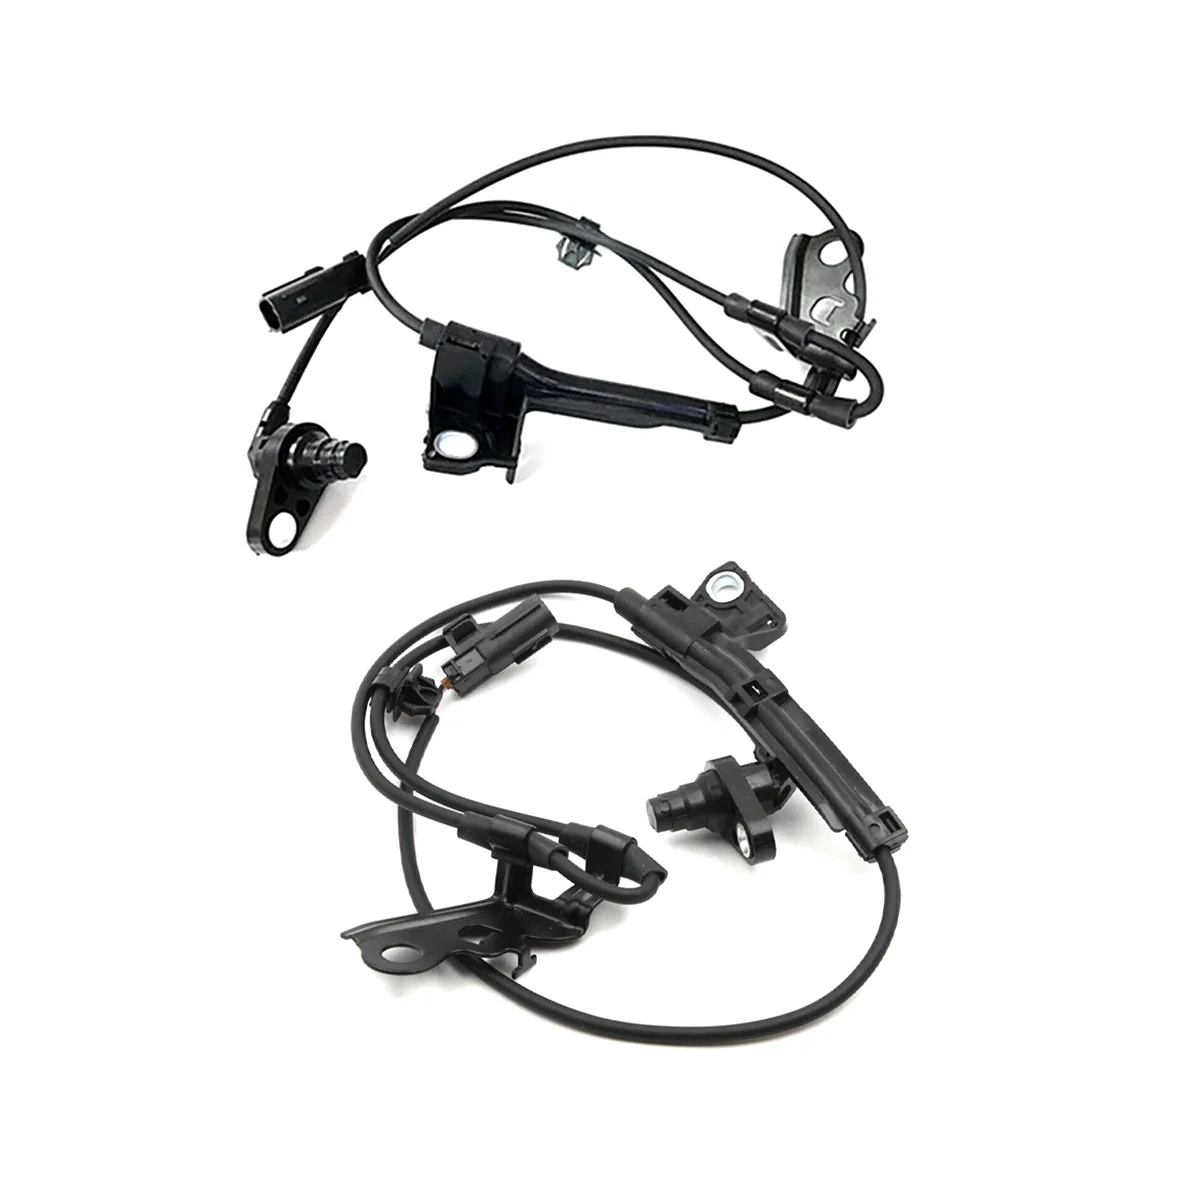 

2 Pcs ABS Wheel Speed Sensor Front Left & Right Fit for Toyota Corolla 09-18 89542-02090 89543-02090